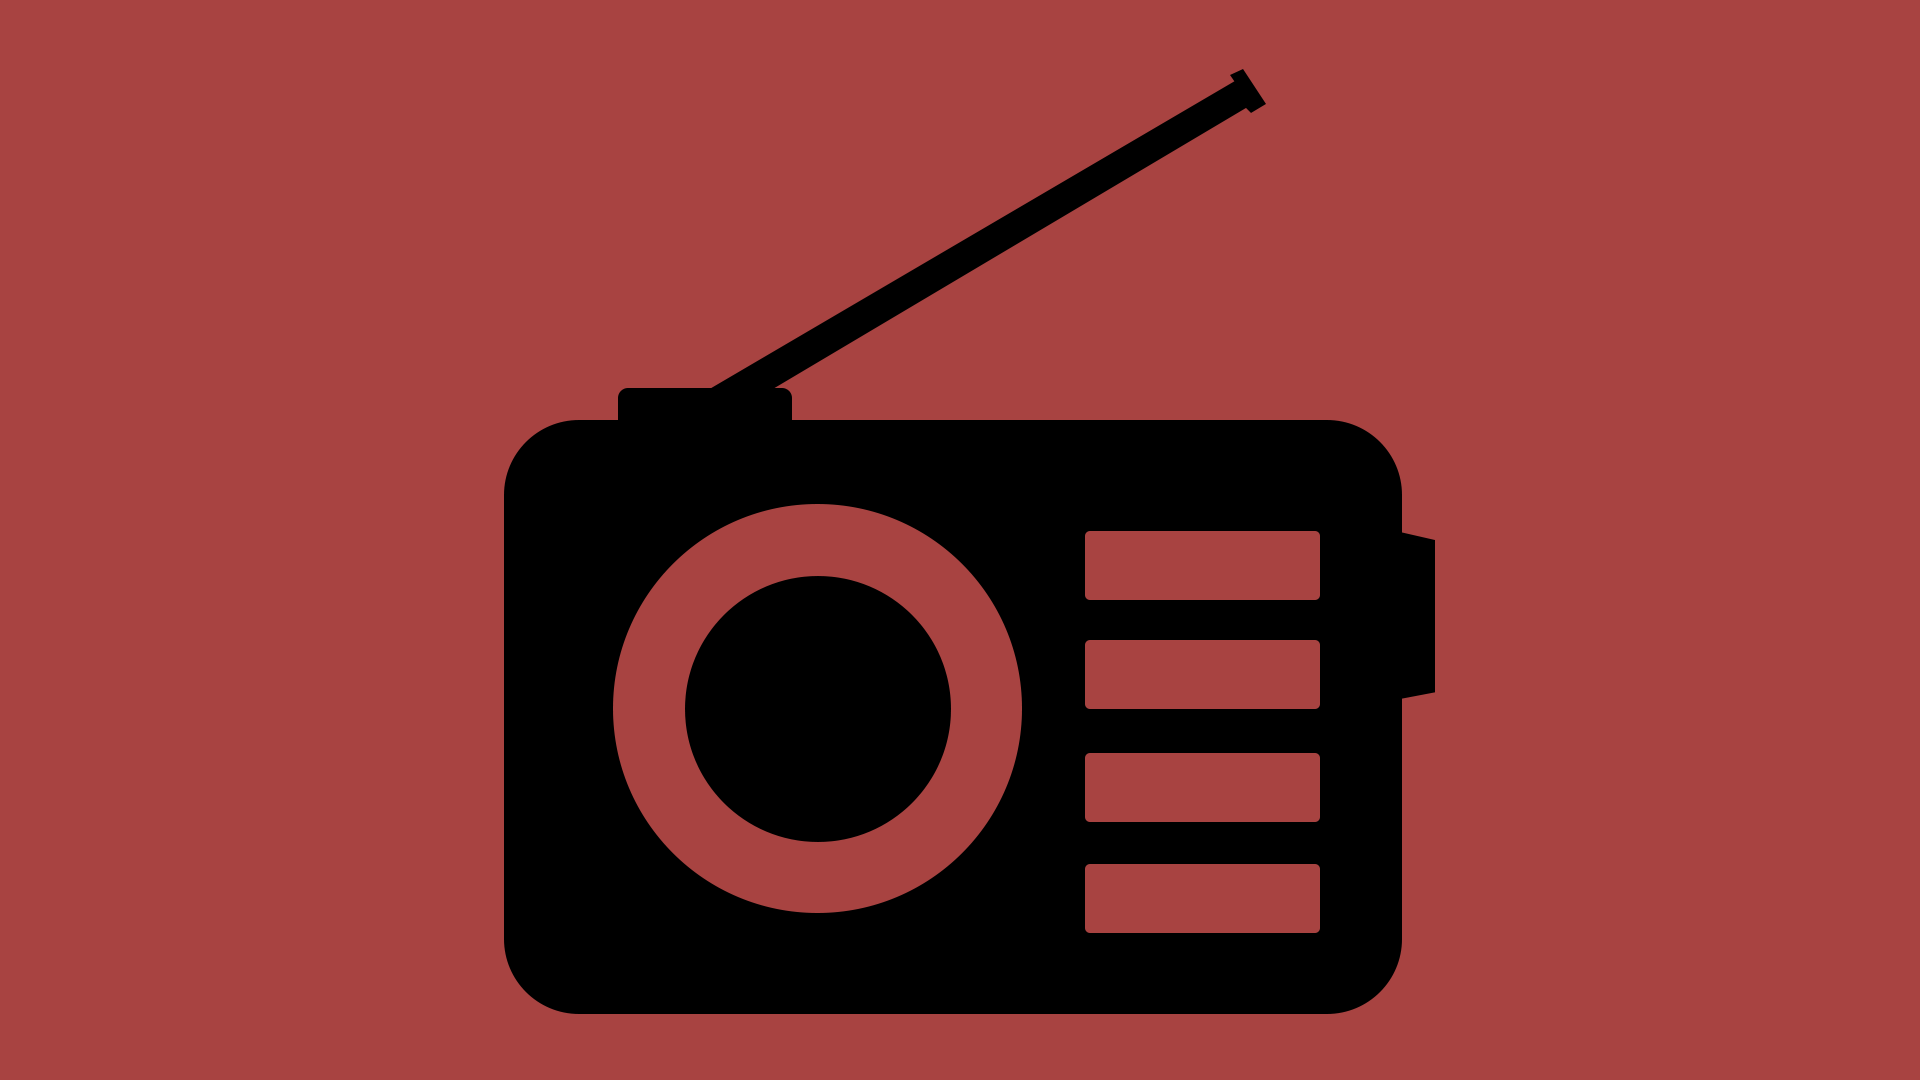 Icon for Tuning In